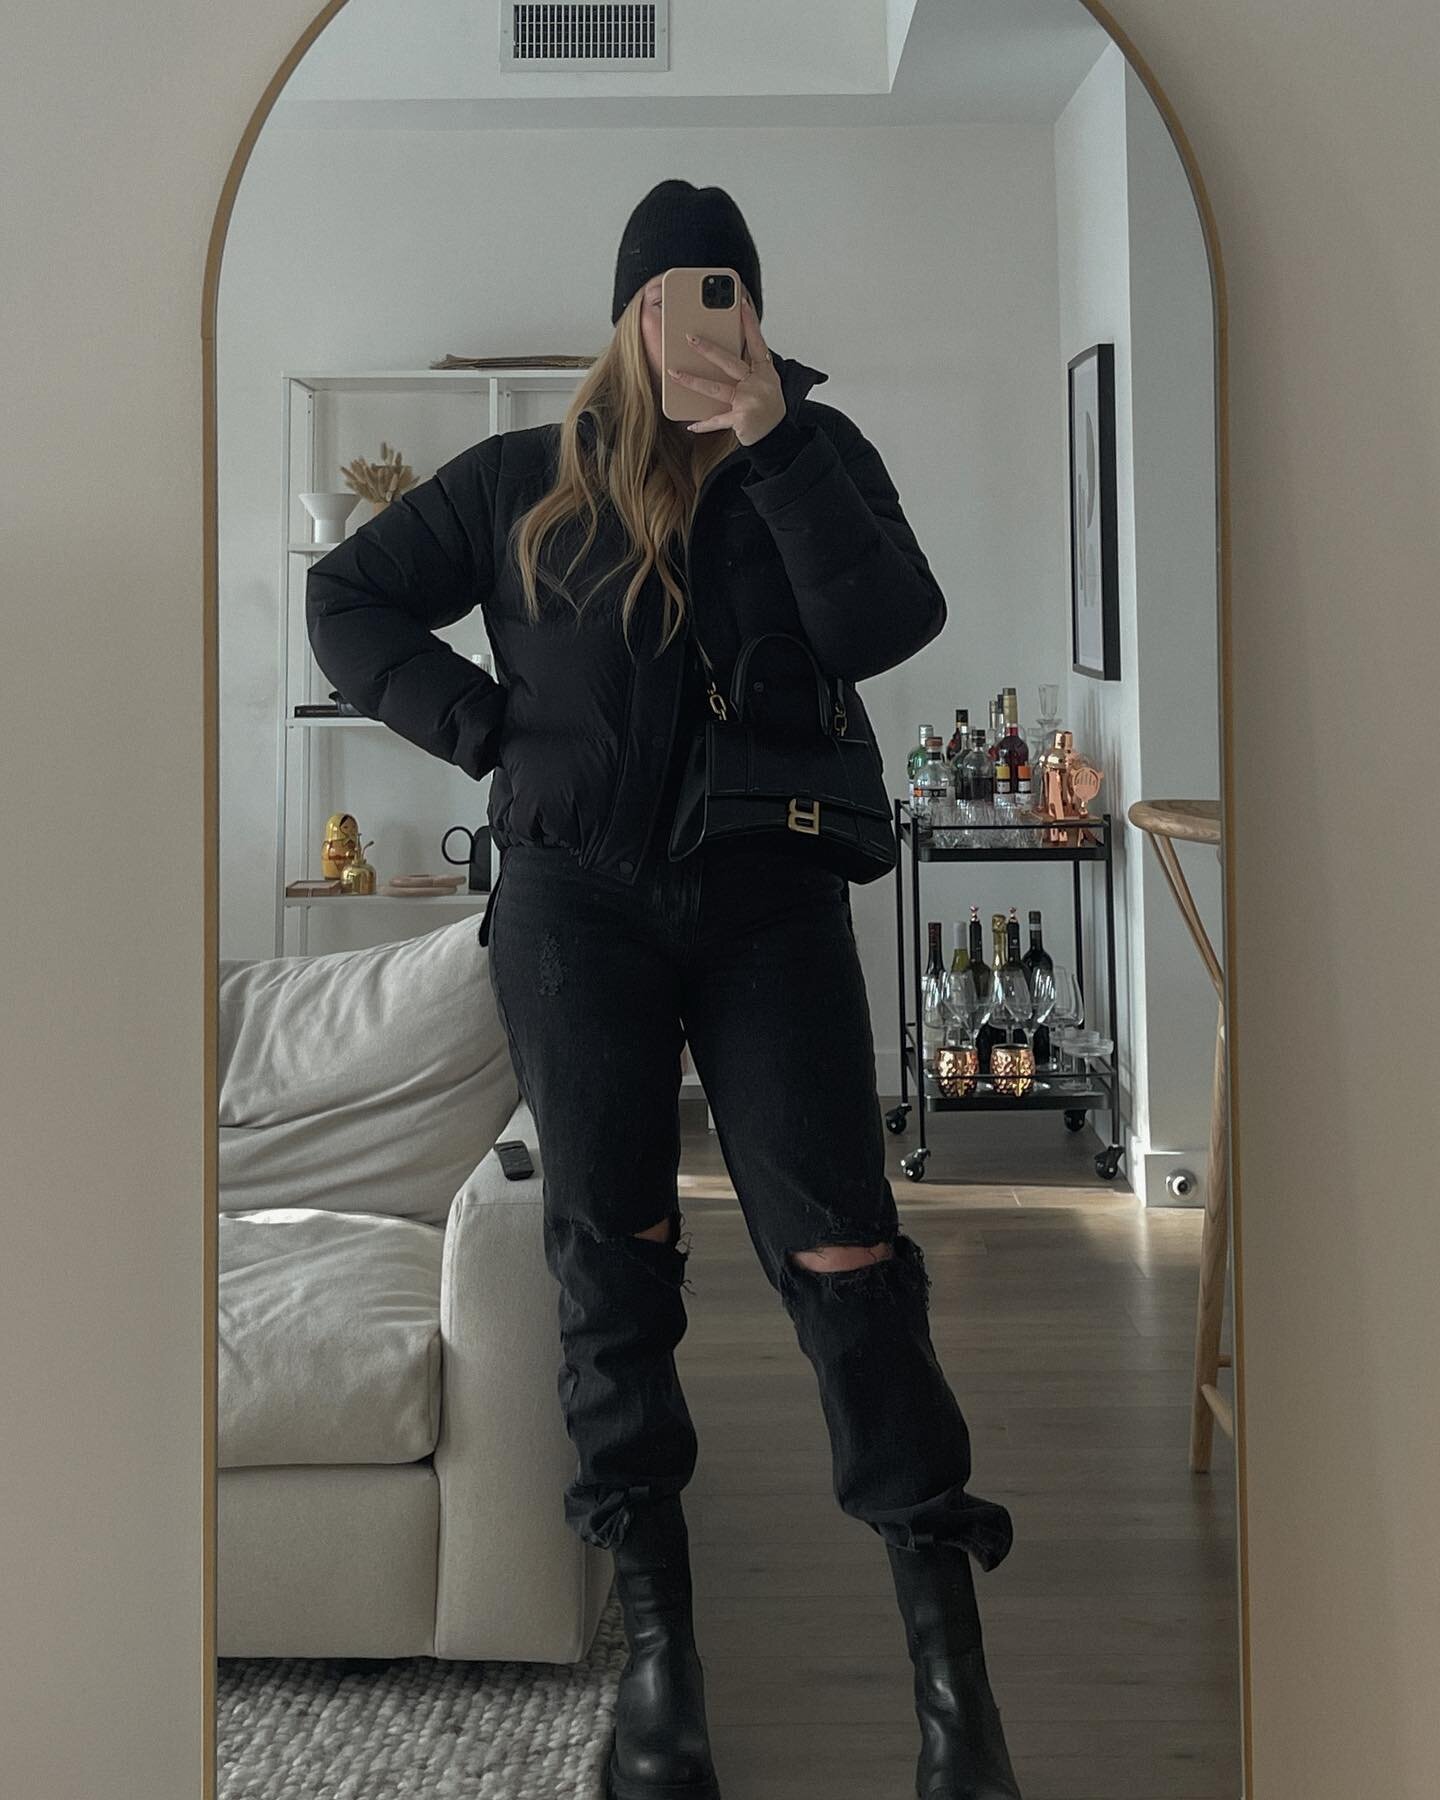 super puffs are *literally* the only thing getting me through this winter

-

#parisianchic #minimalfeed #allblackvis #allblackoutfit #canadianfashionblogger #fbloggerstyle #discoverfashion #ootdblogger #dosesofstyle #fashionadvice #instagramcreator 